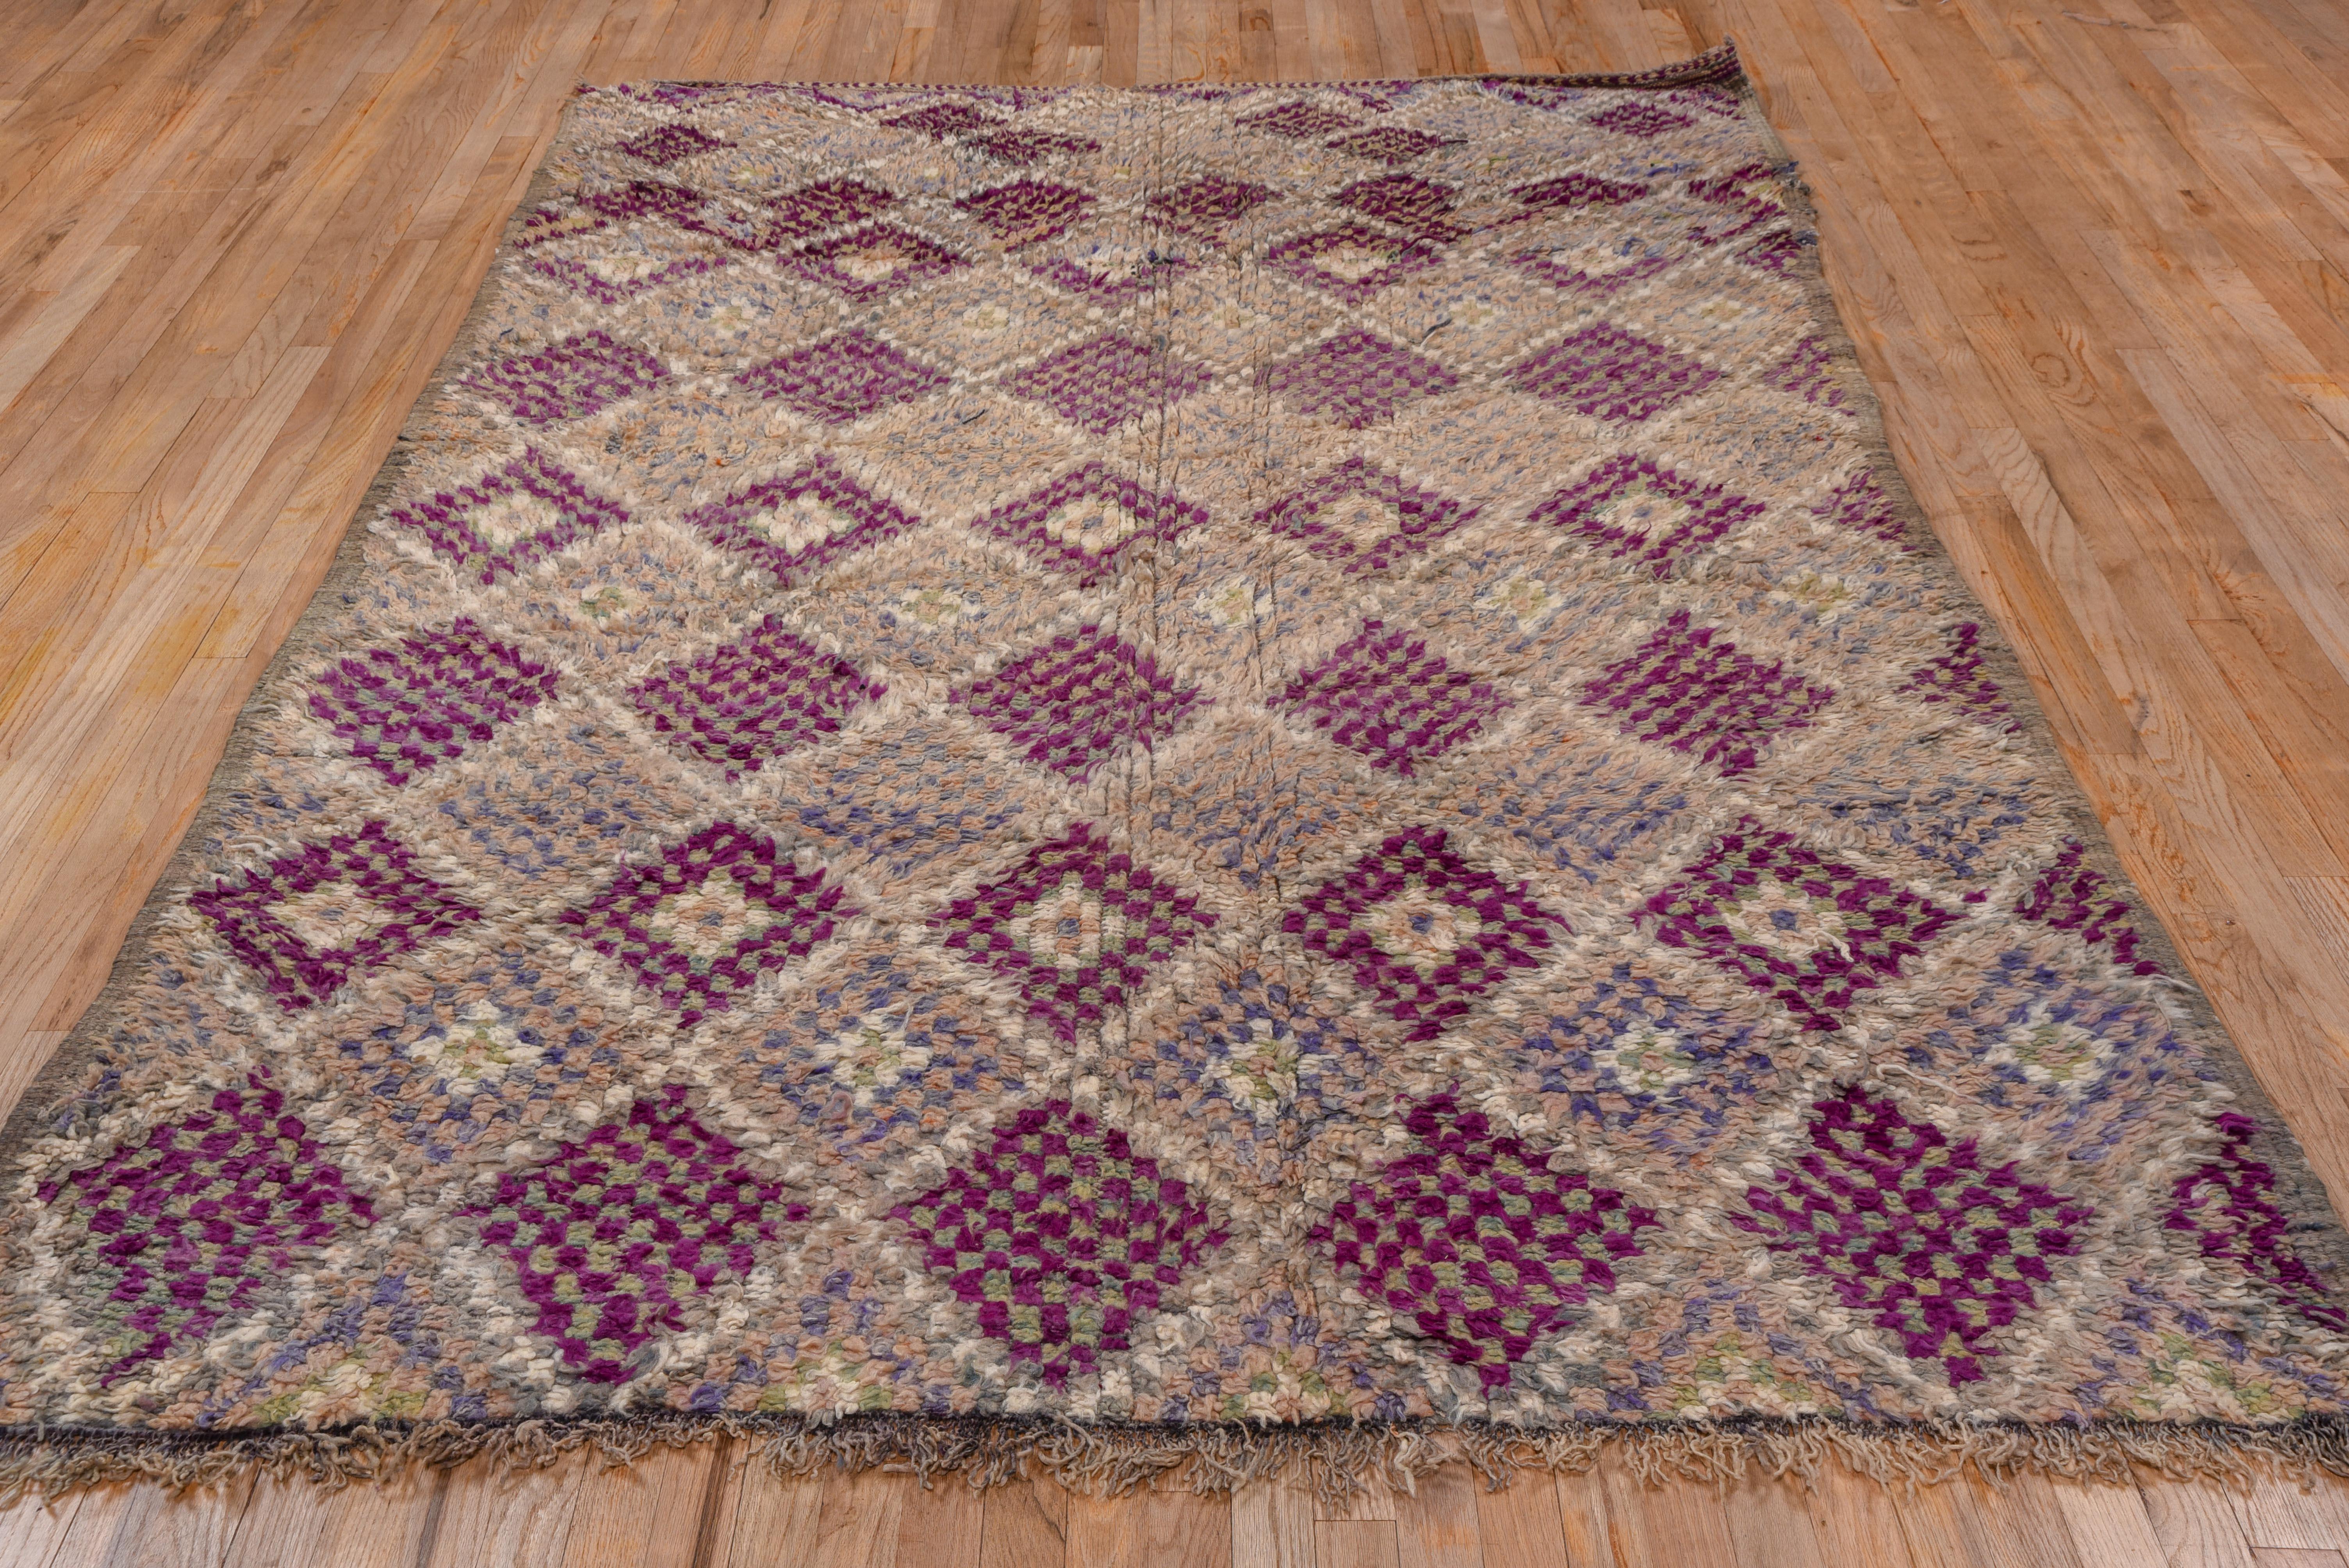 Village rug in purple and light earth tones